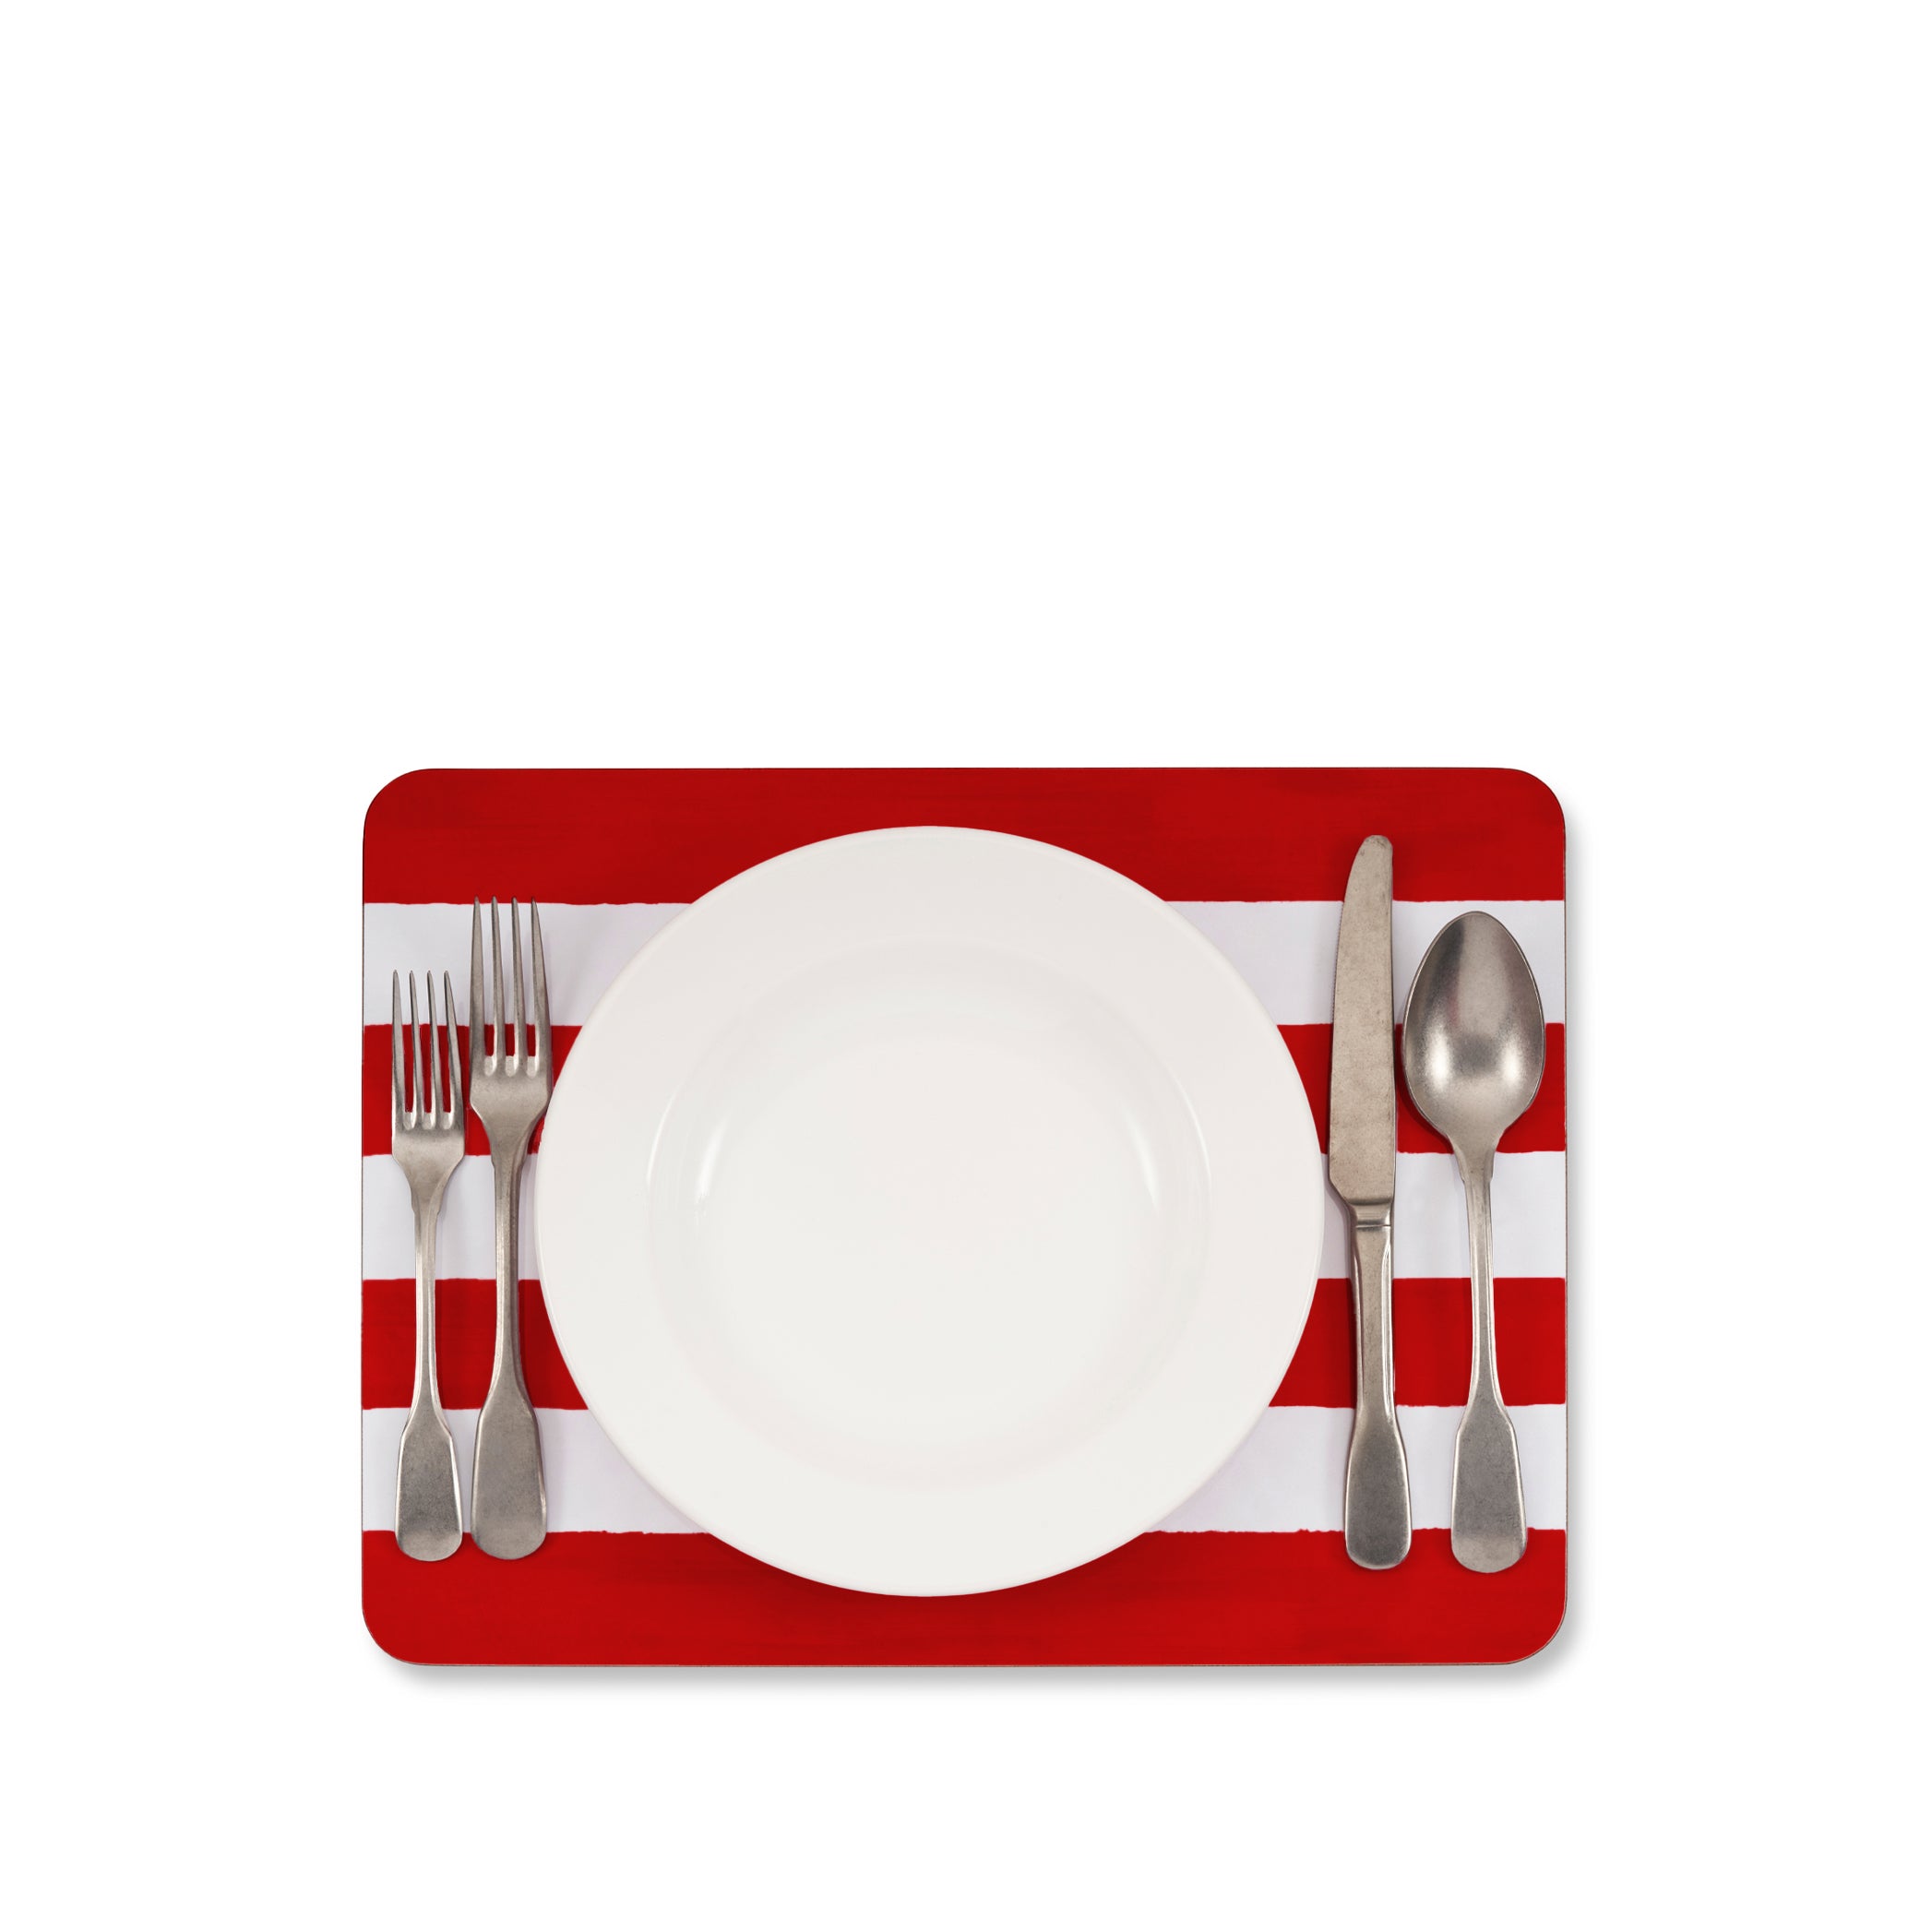 Stripe Cork-Backed Placemat in Claret Red